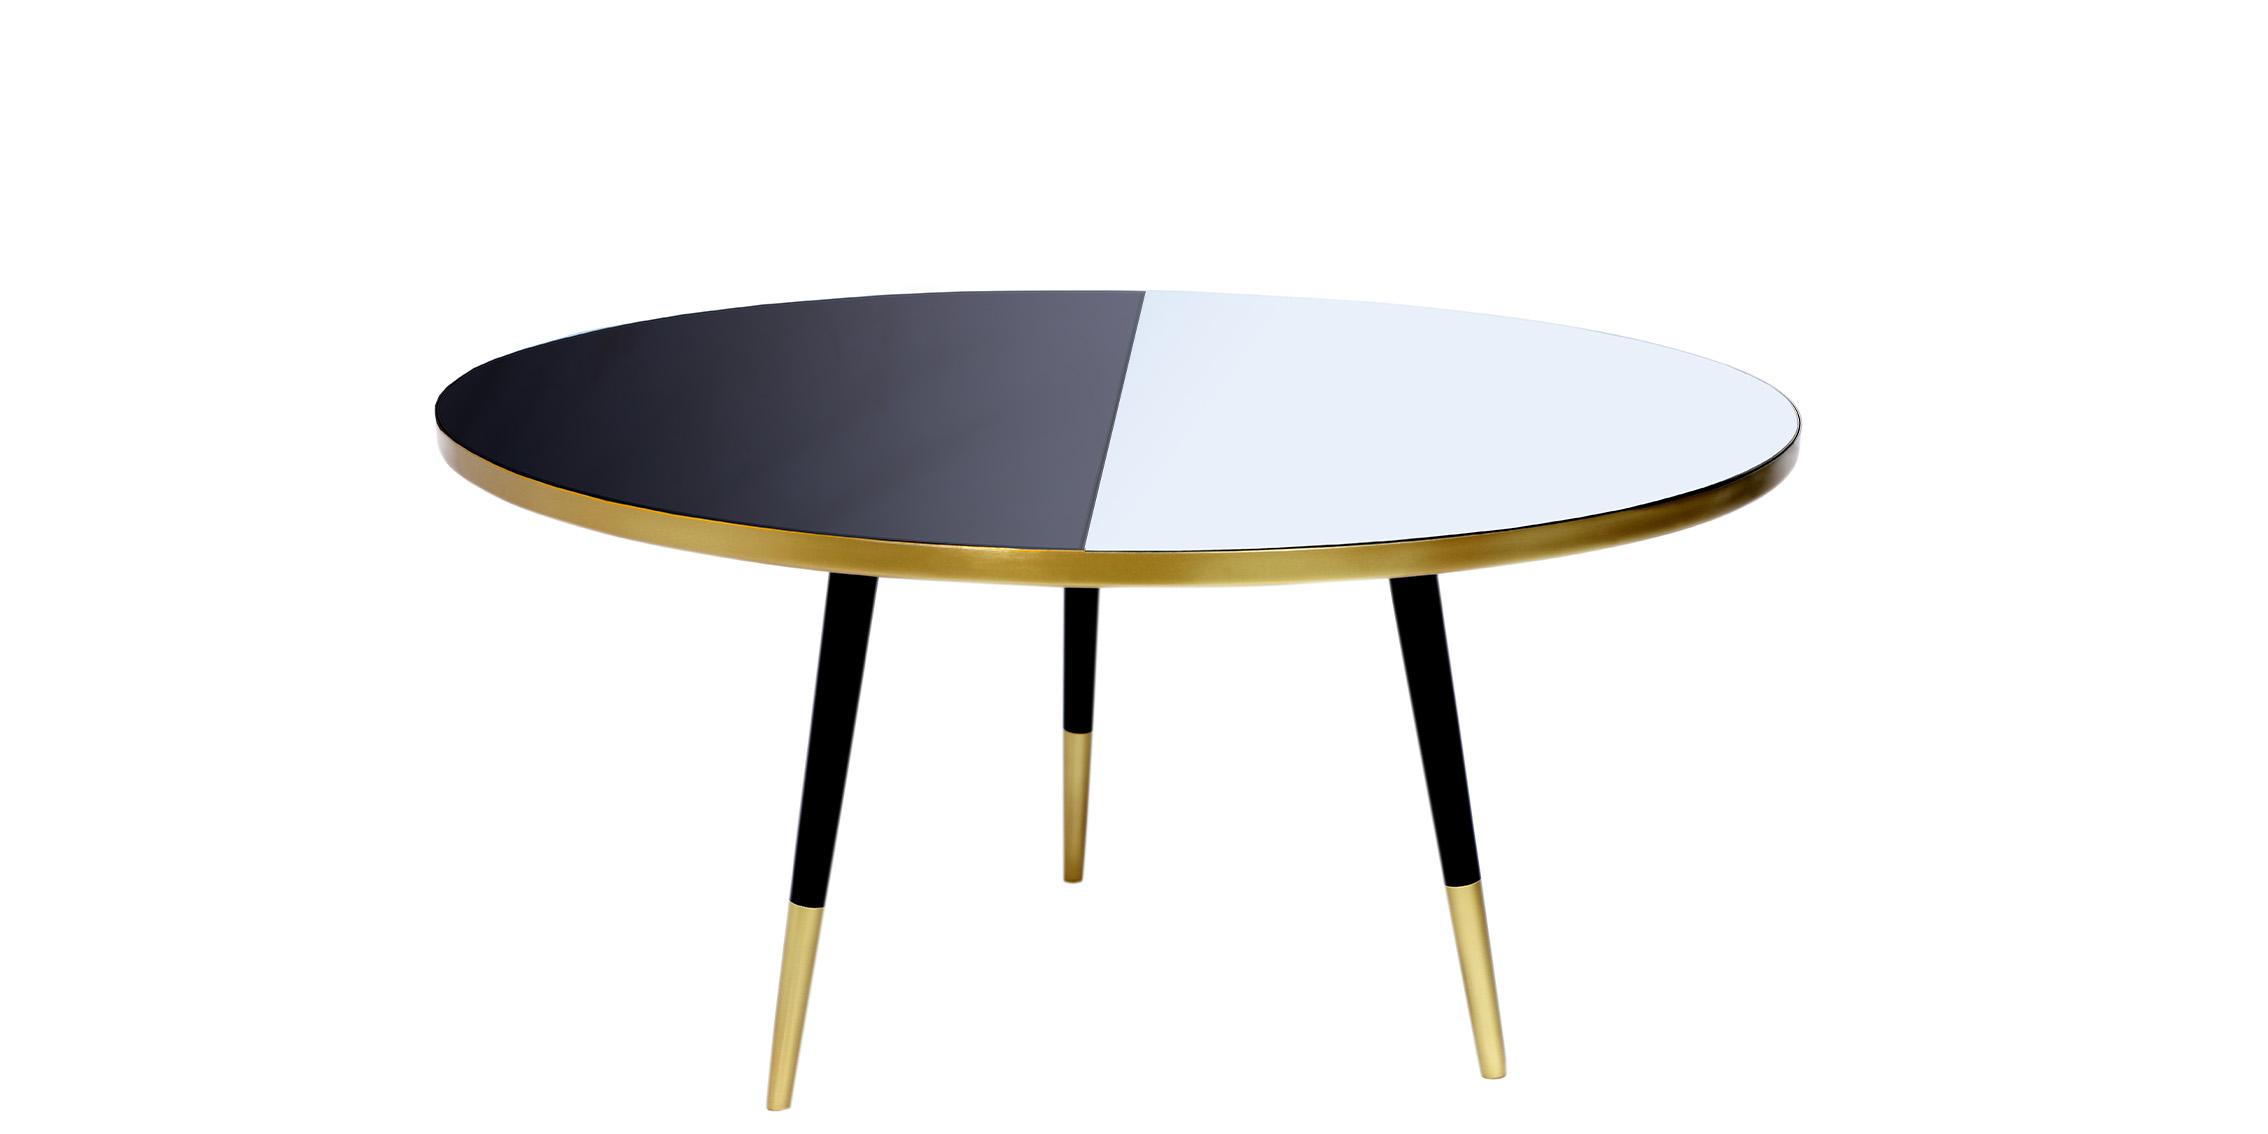 Contemporary, Modern Coffee Table REFLECTION 294-CT 294-CT in Gold, Black 